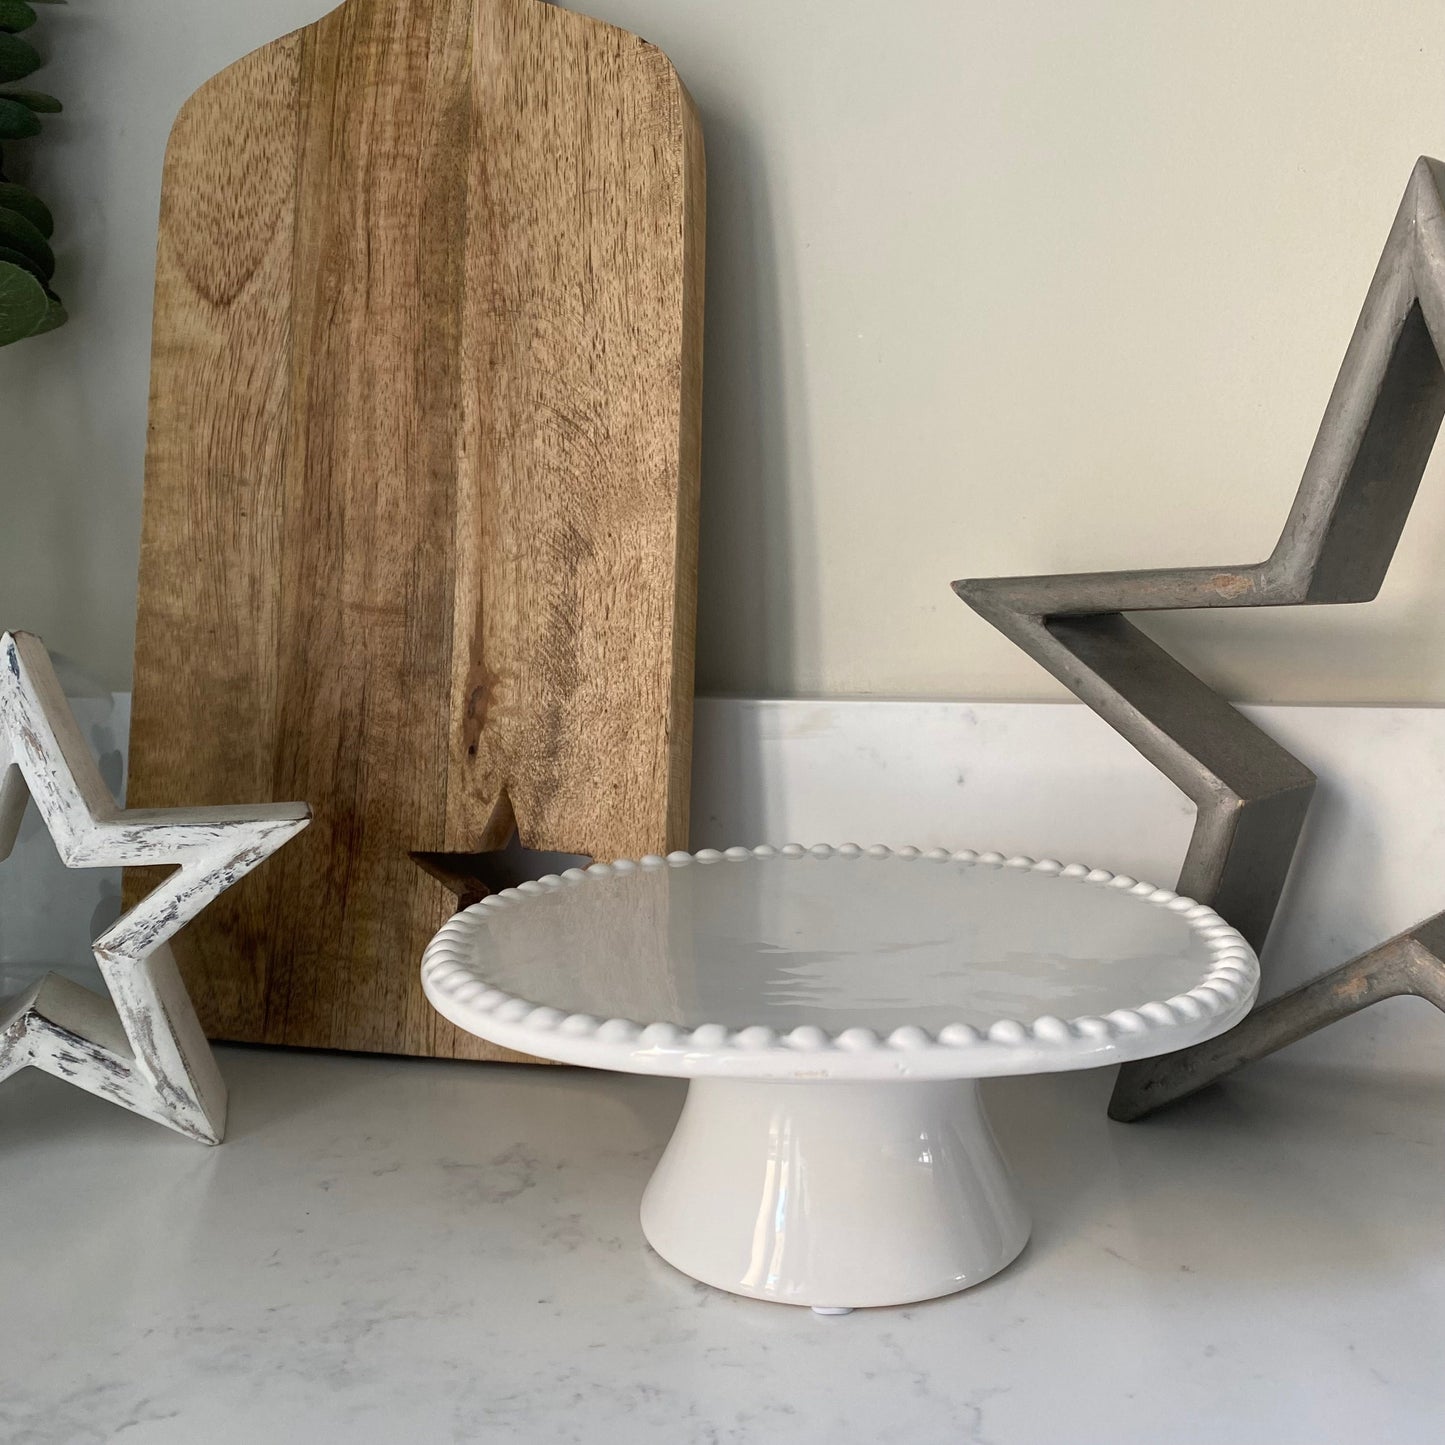 Elegant 6 Inch Cakestand / Display Plate - imperfect